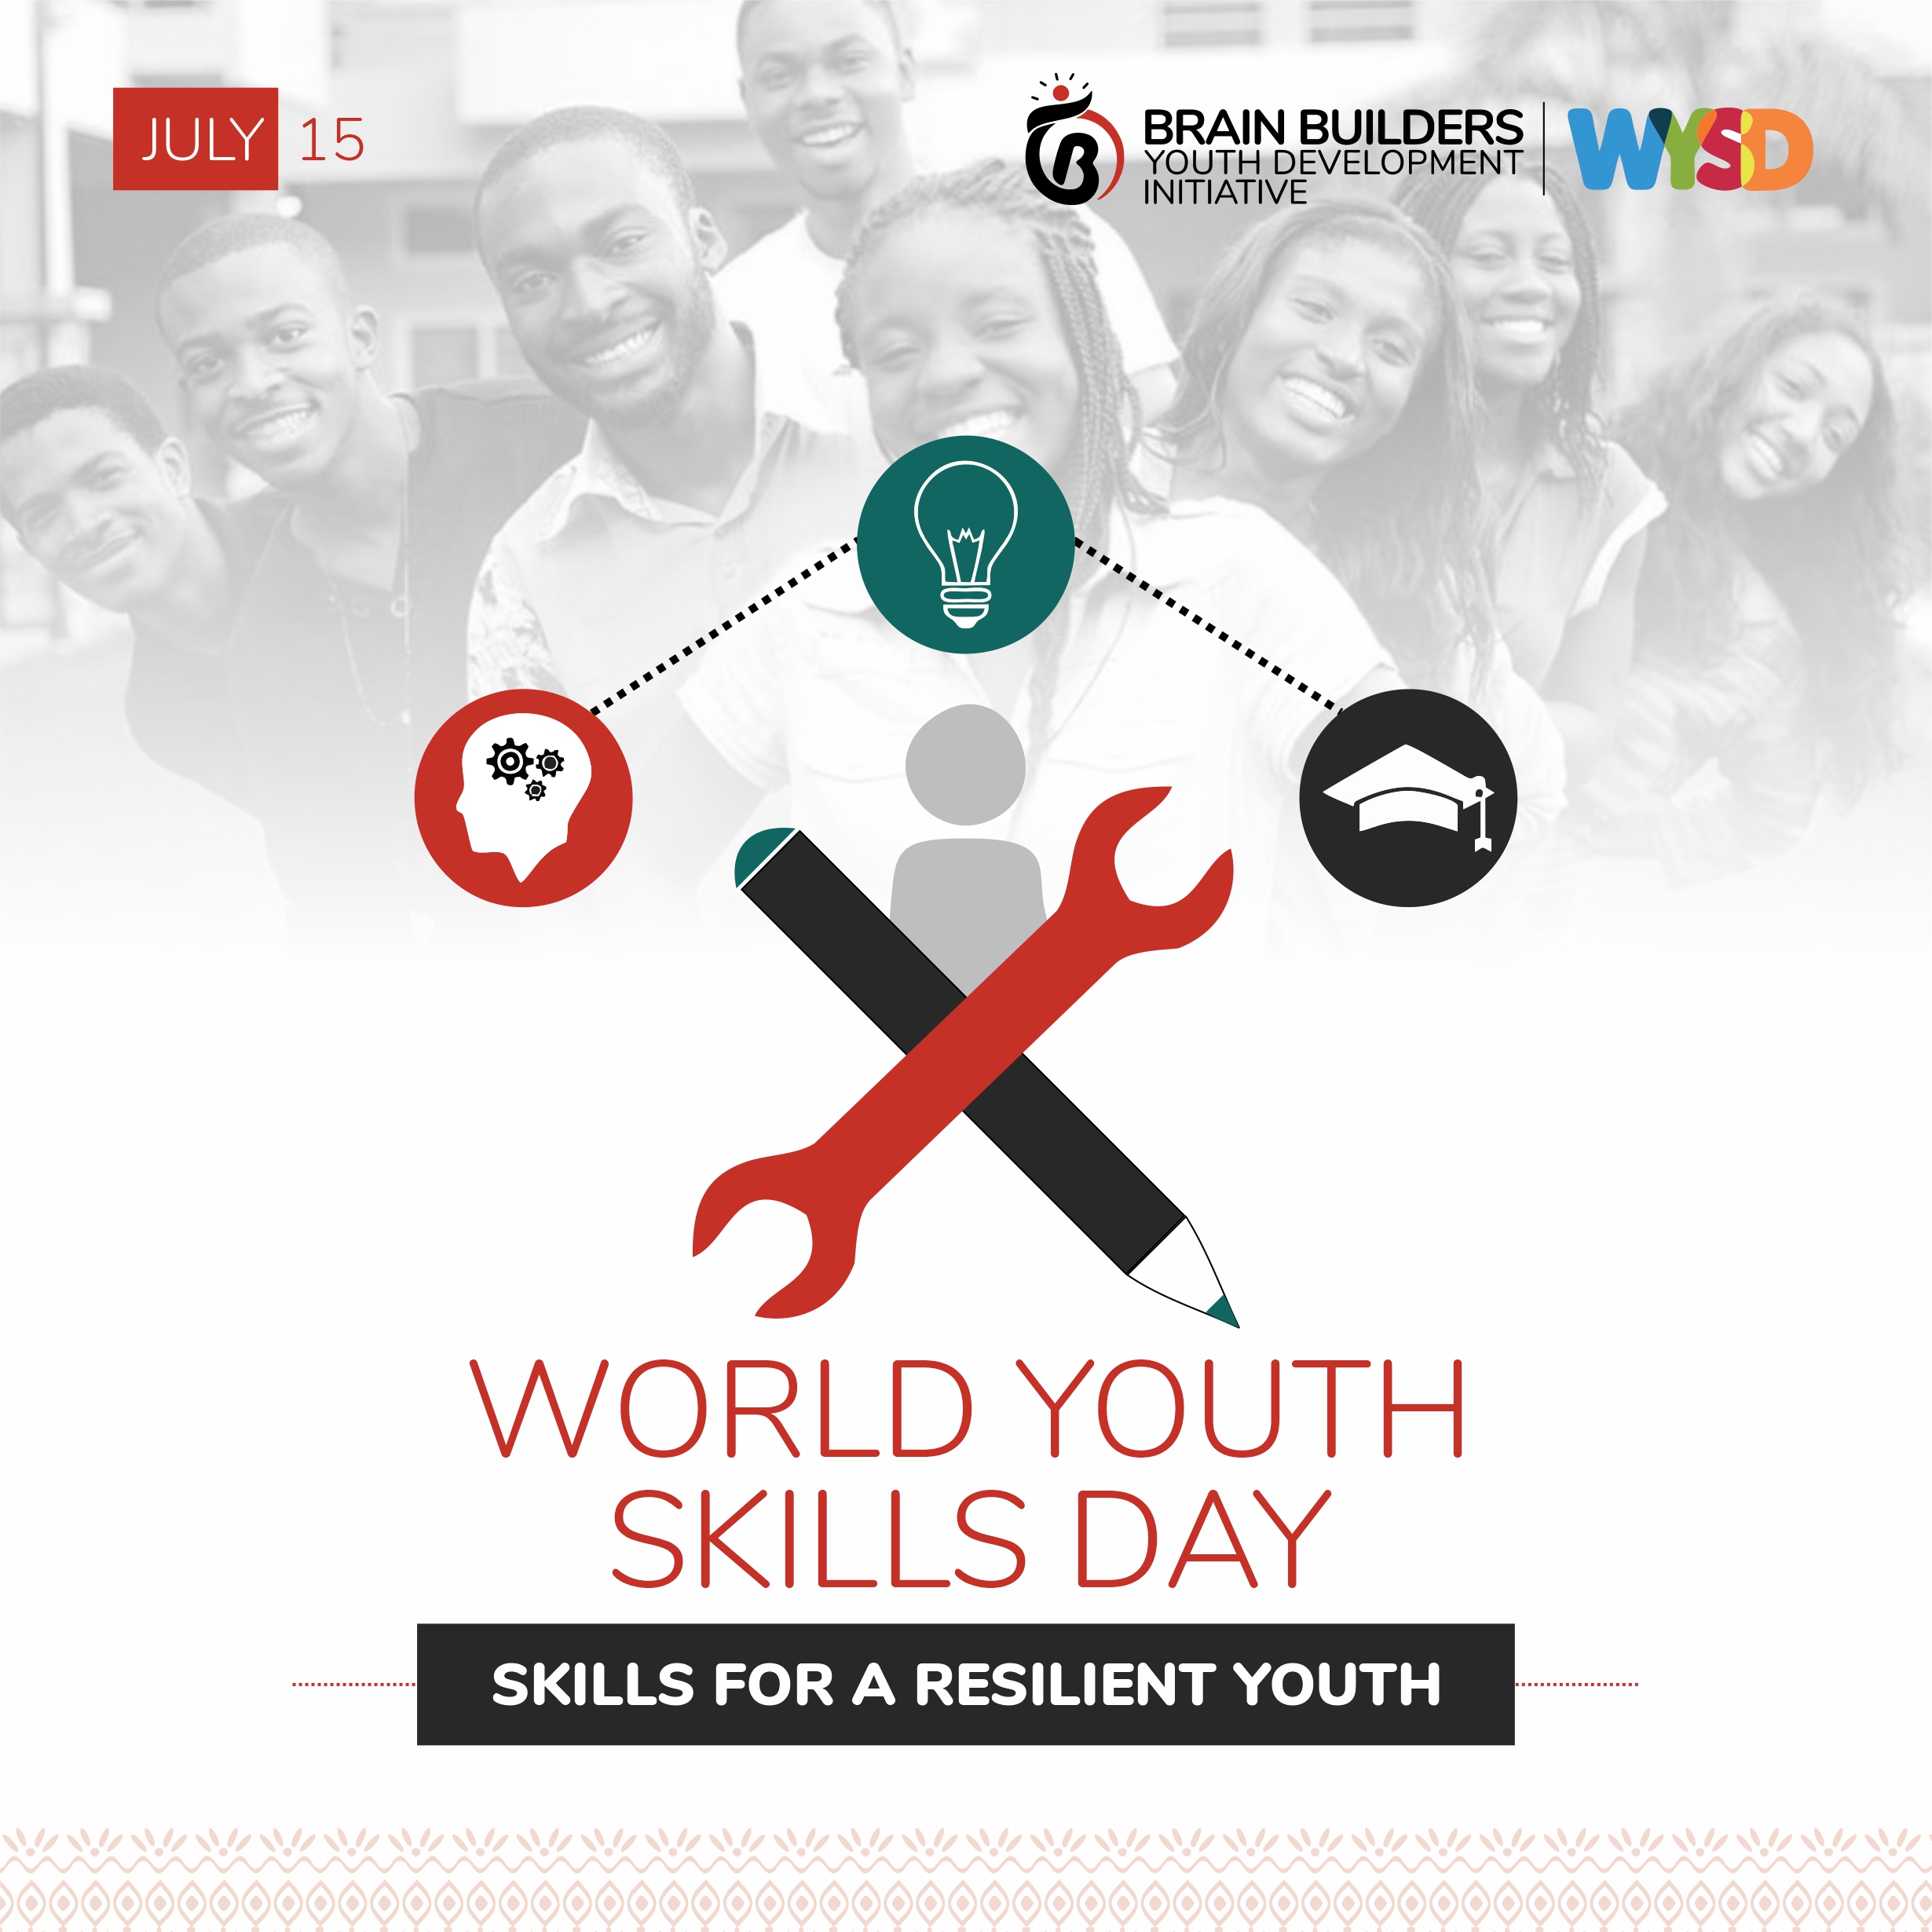 WORLD YOUTH SKILLS DAY’ 2020; SKILLS FOR A RESILIENT YOUTH